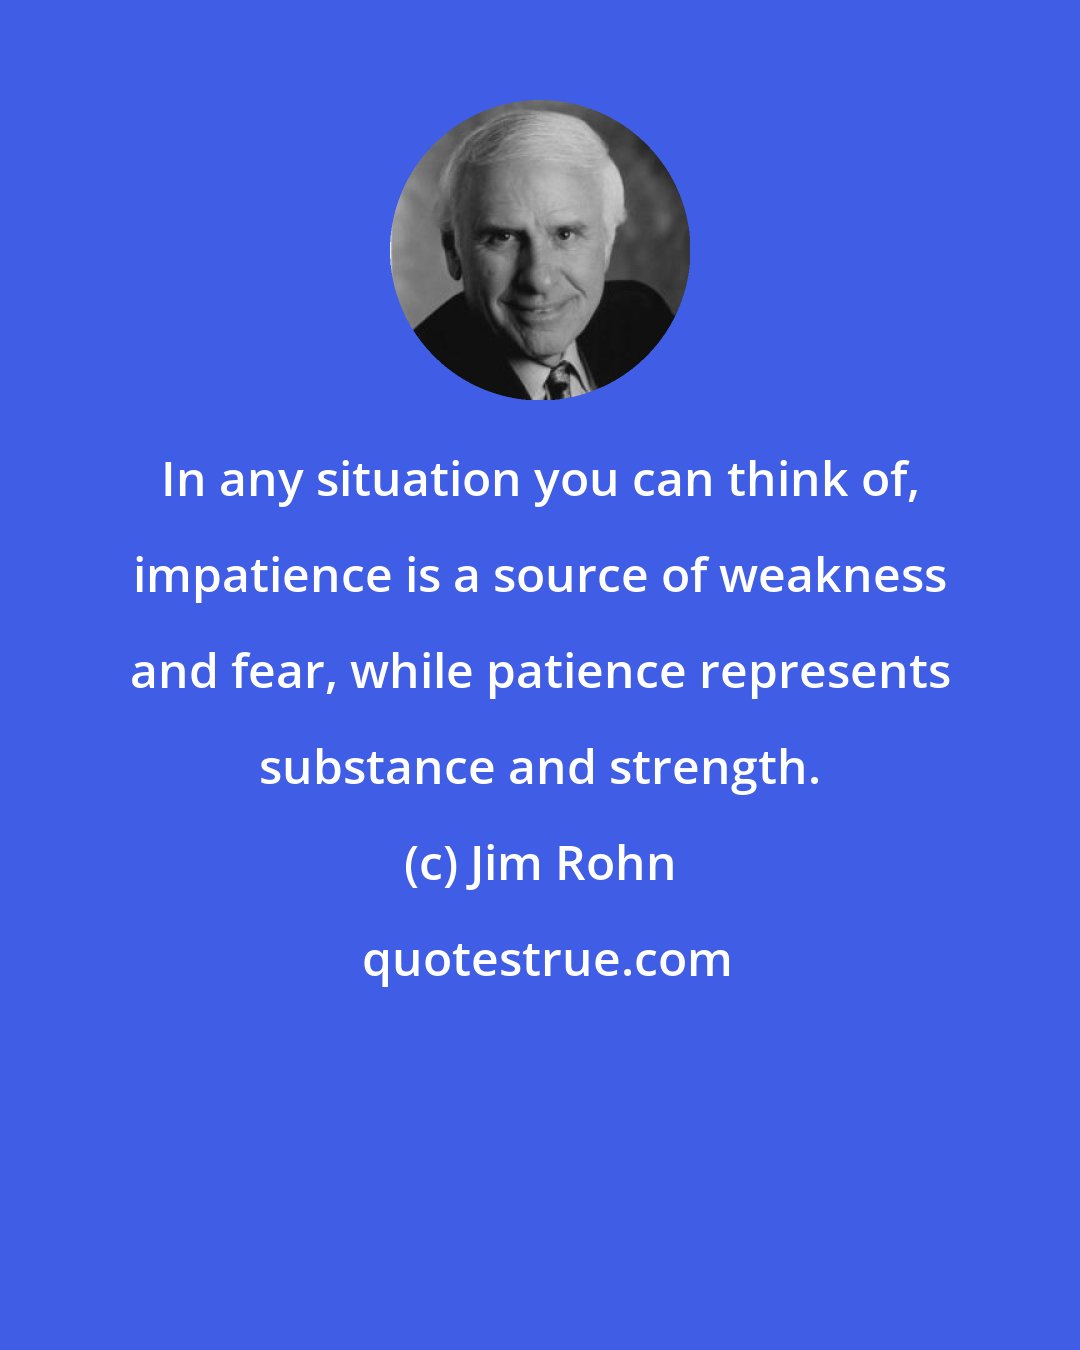 Jim Rohn: In any situation you can think of, impatience is a source of weakness and fear, while patience represents substance and strength.